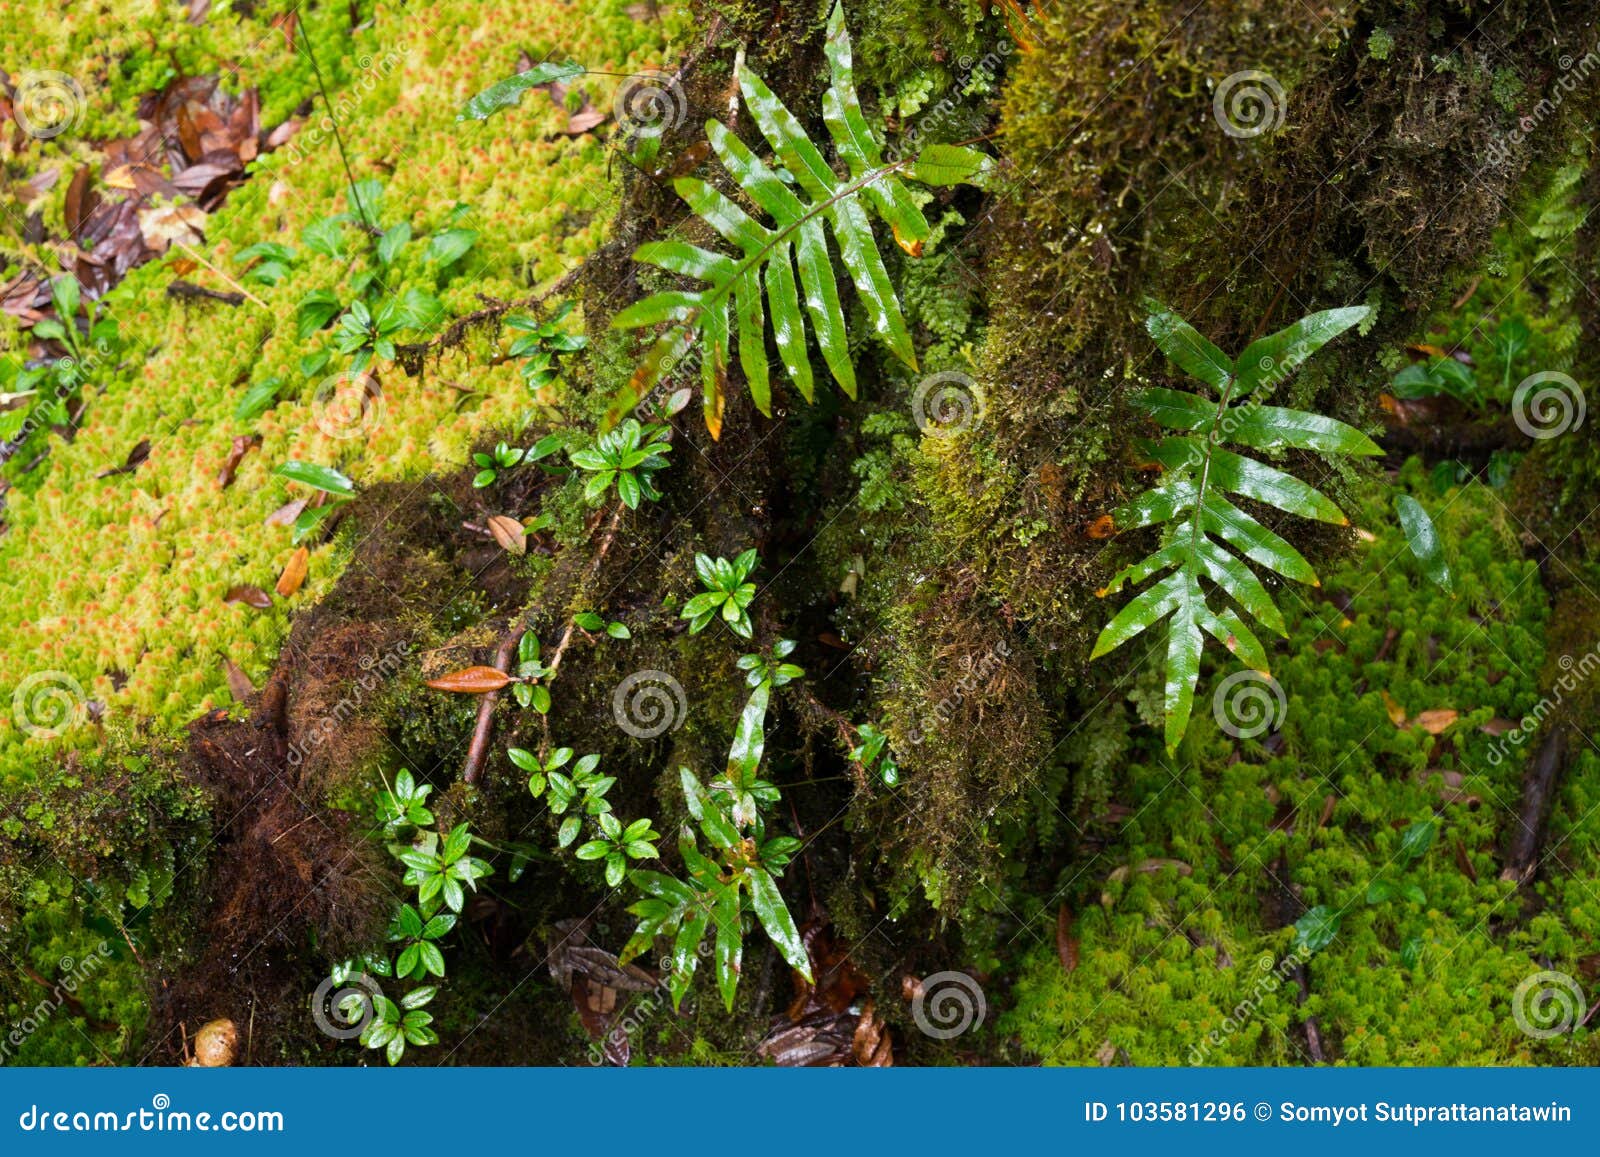 Rain Forest Background With Green Mosses And Fern Stock Photo Image Of Closeup Area 103581296